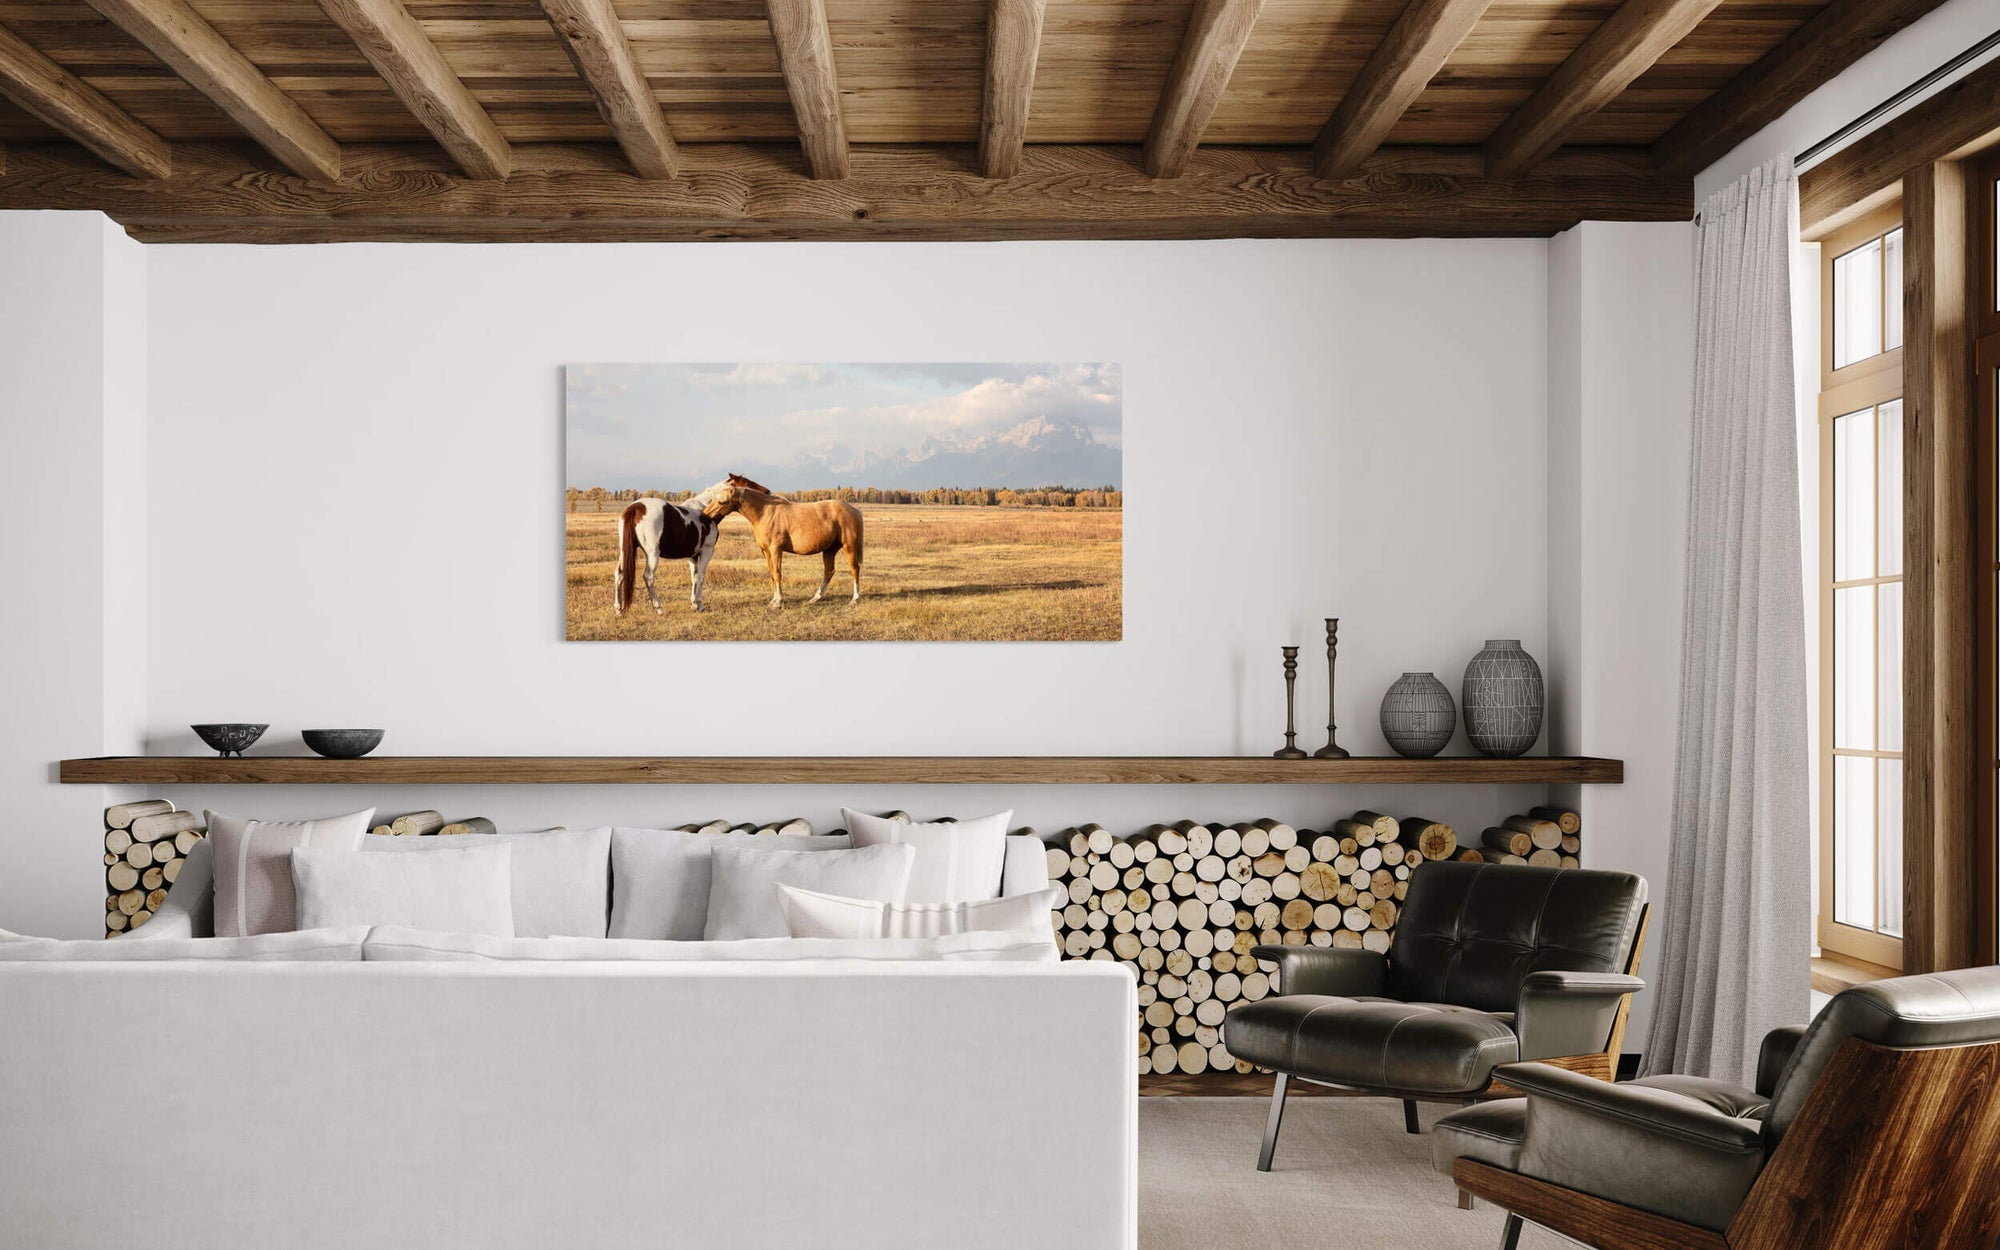 A piece of Jackson Hole art showing horses in Grand Teton National Park hangs in a living room.